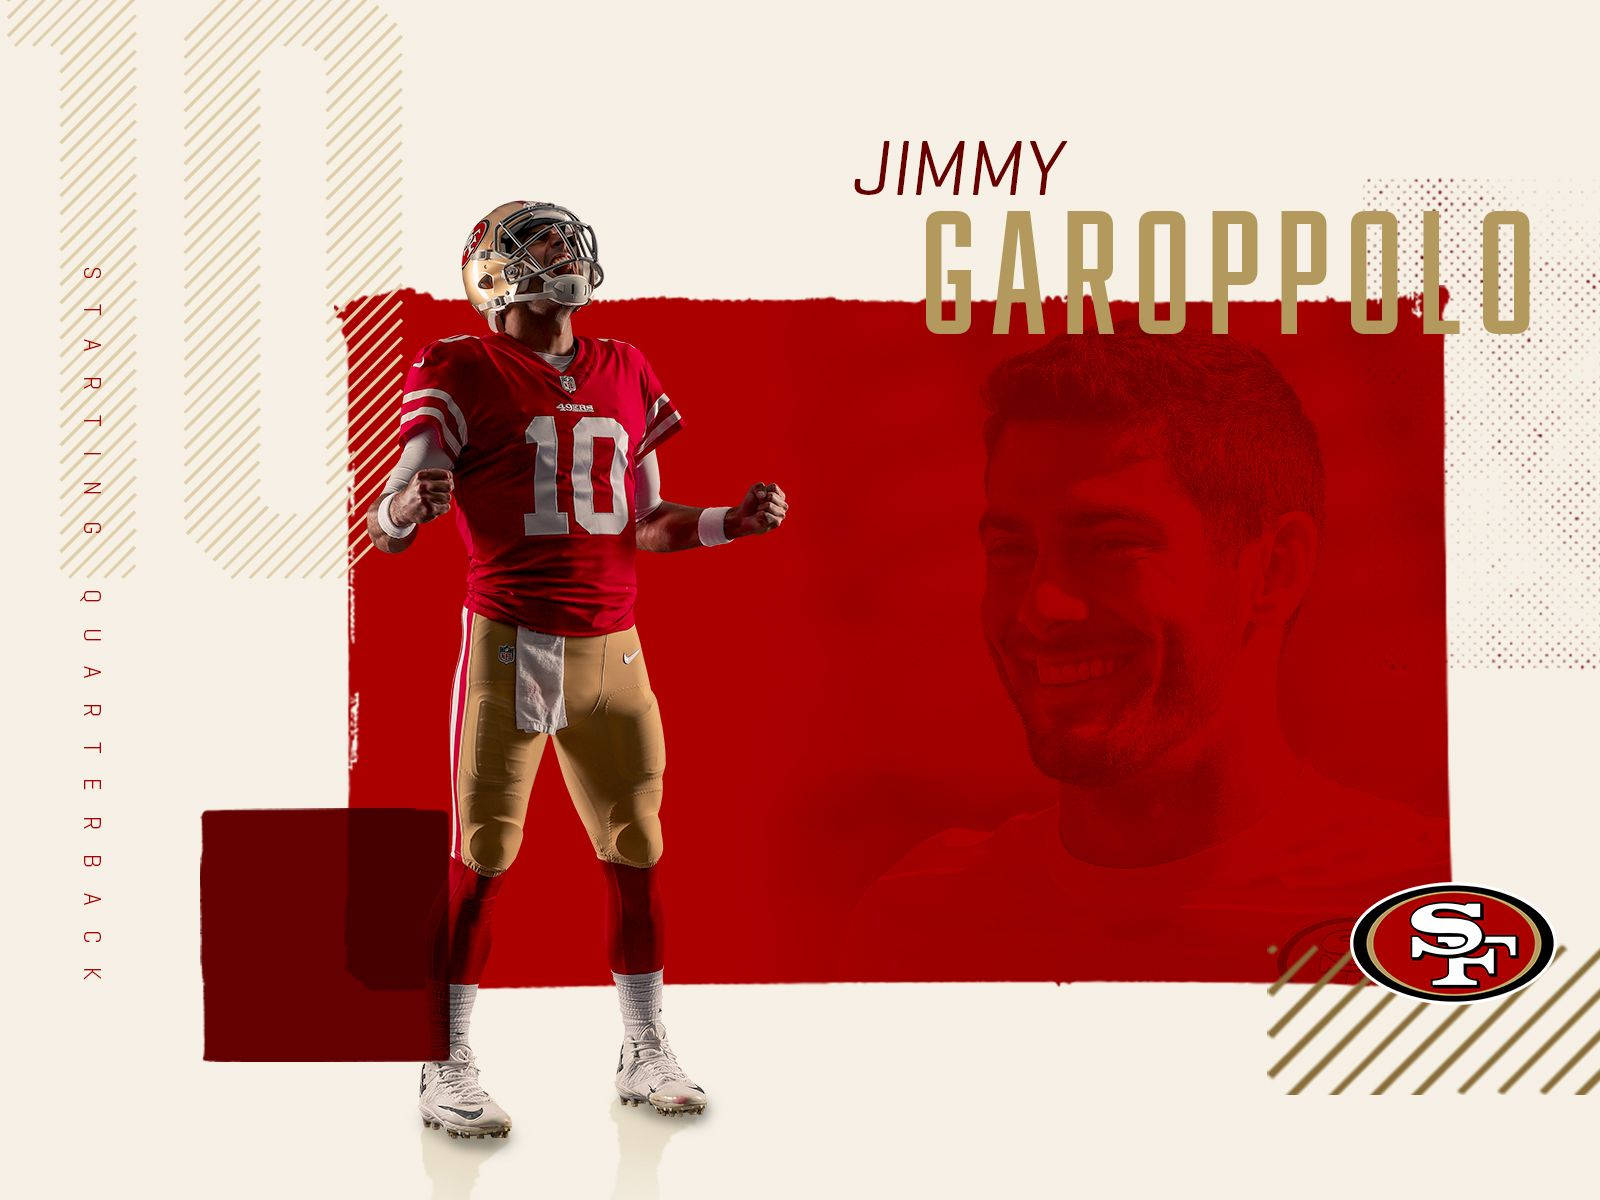 Jimmy Garoppolo in Red and Gold Wallpaper